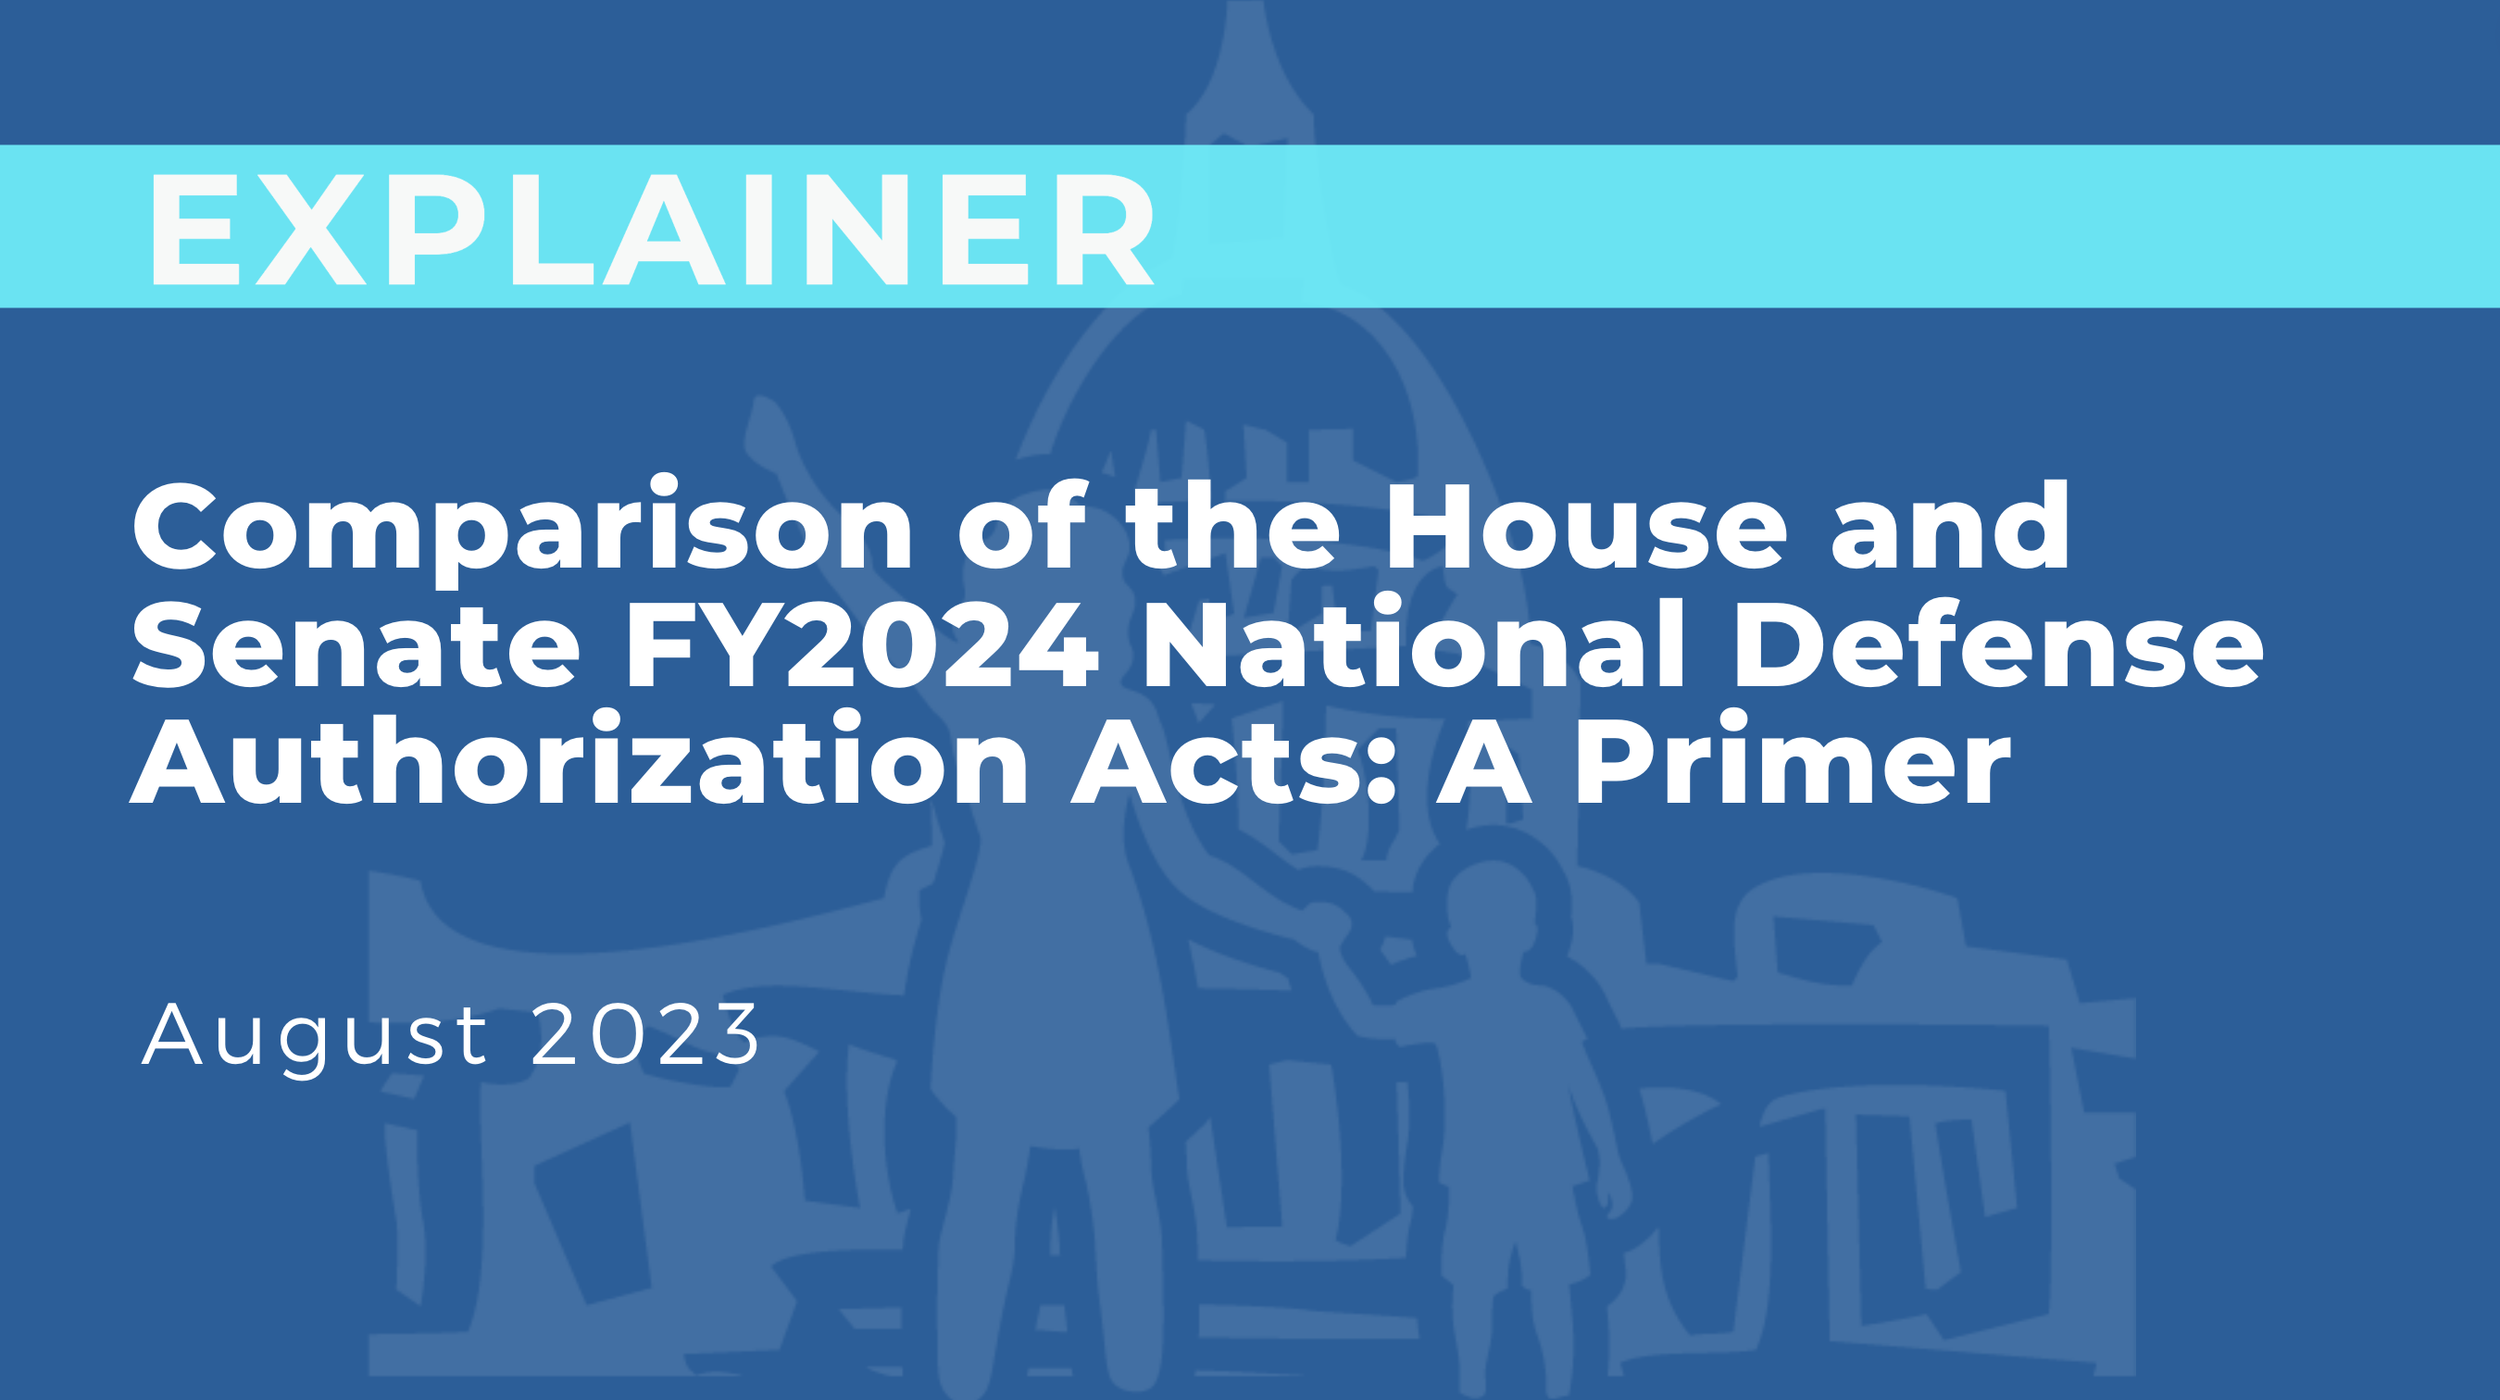 Comparison of the House and Senate FY2024 National Defense Authorization Acts: A Primer